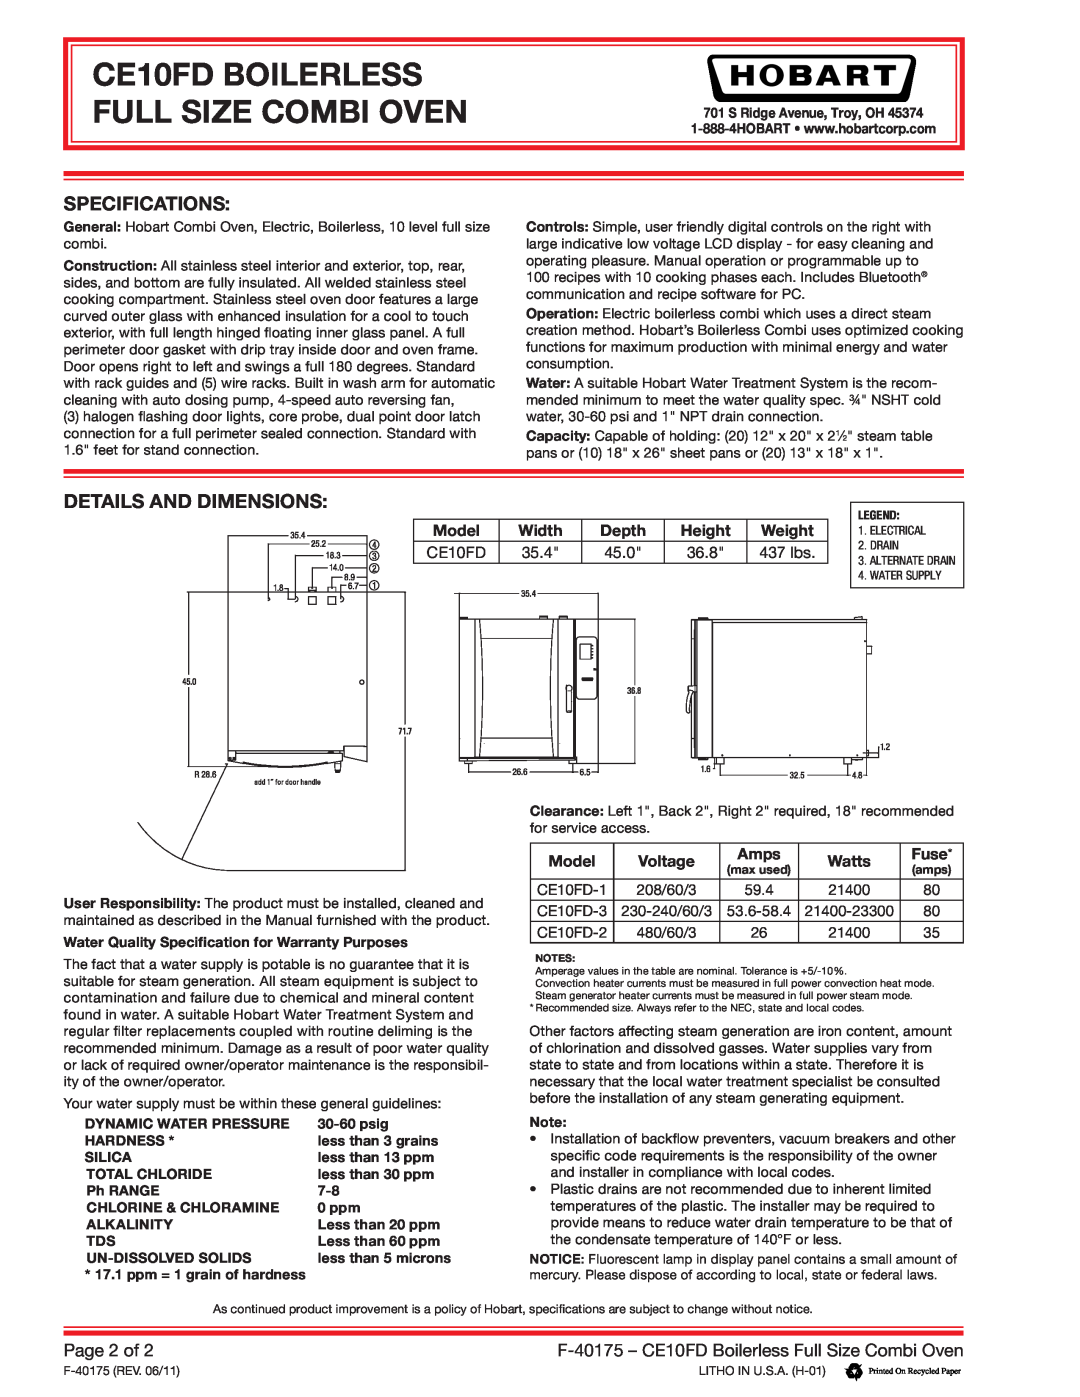 Hobart Specifications, Details And Dimensions, Page 2 of, CE10FD BOILERLESS FULL SIZE COMBI OVEN, Model, Width, Depth 